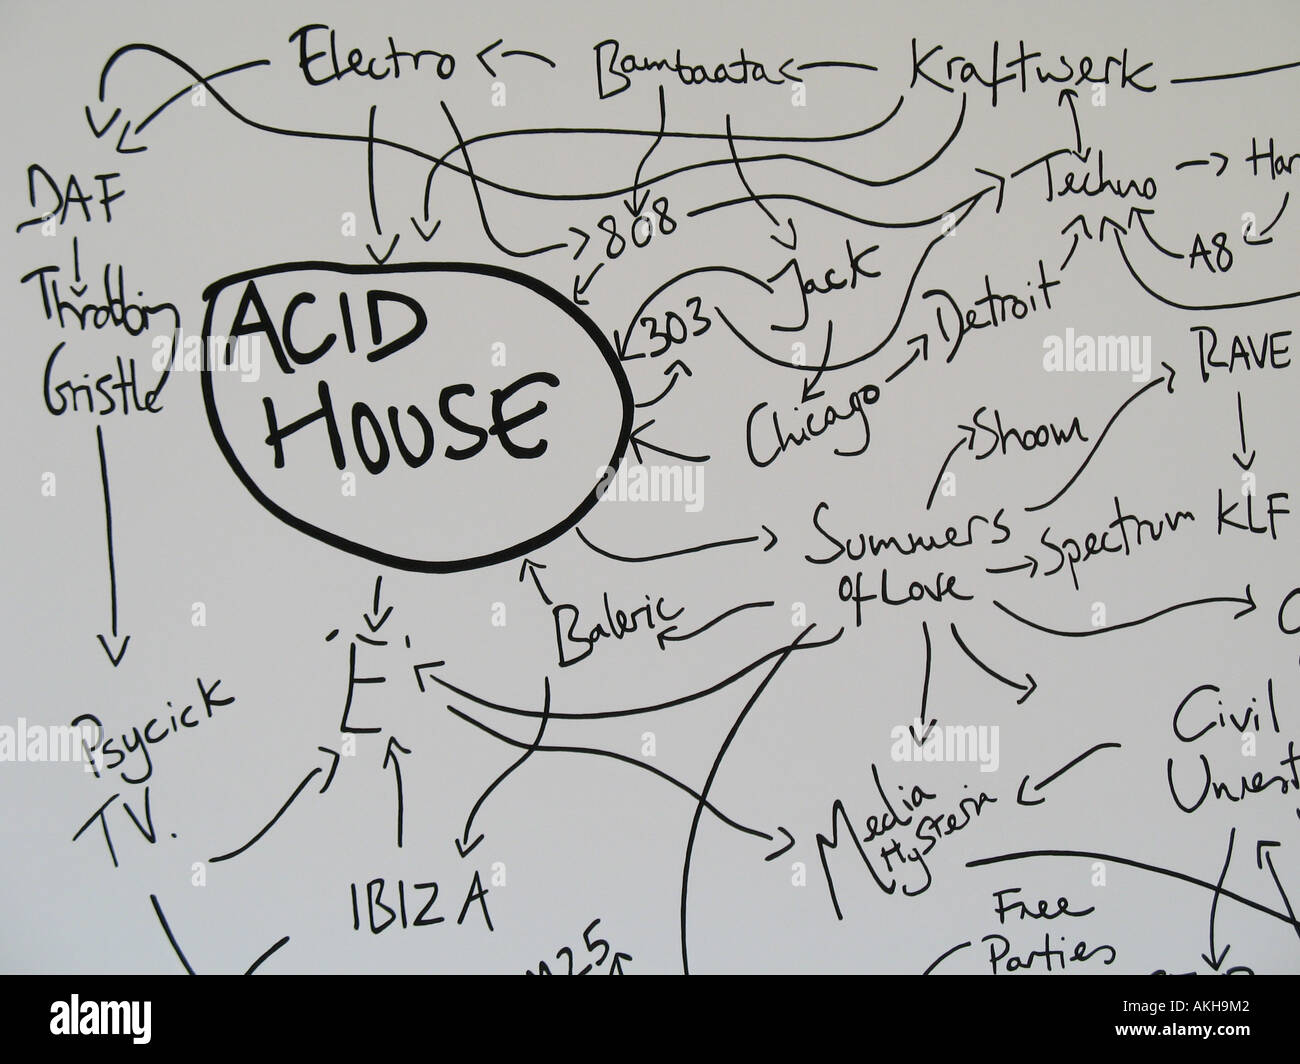 Jeremy Deller Drawing Showing The Connection Of Acid House Music Stock Photo Alamy